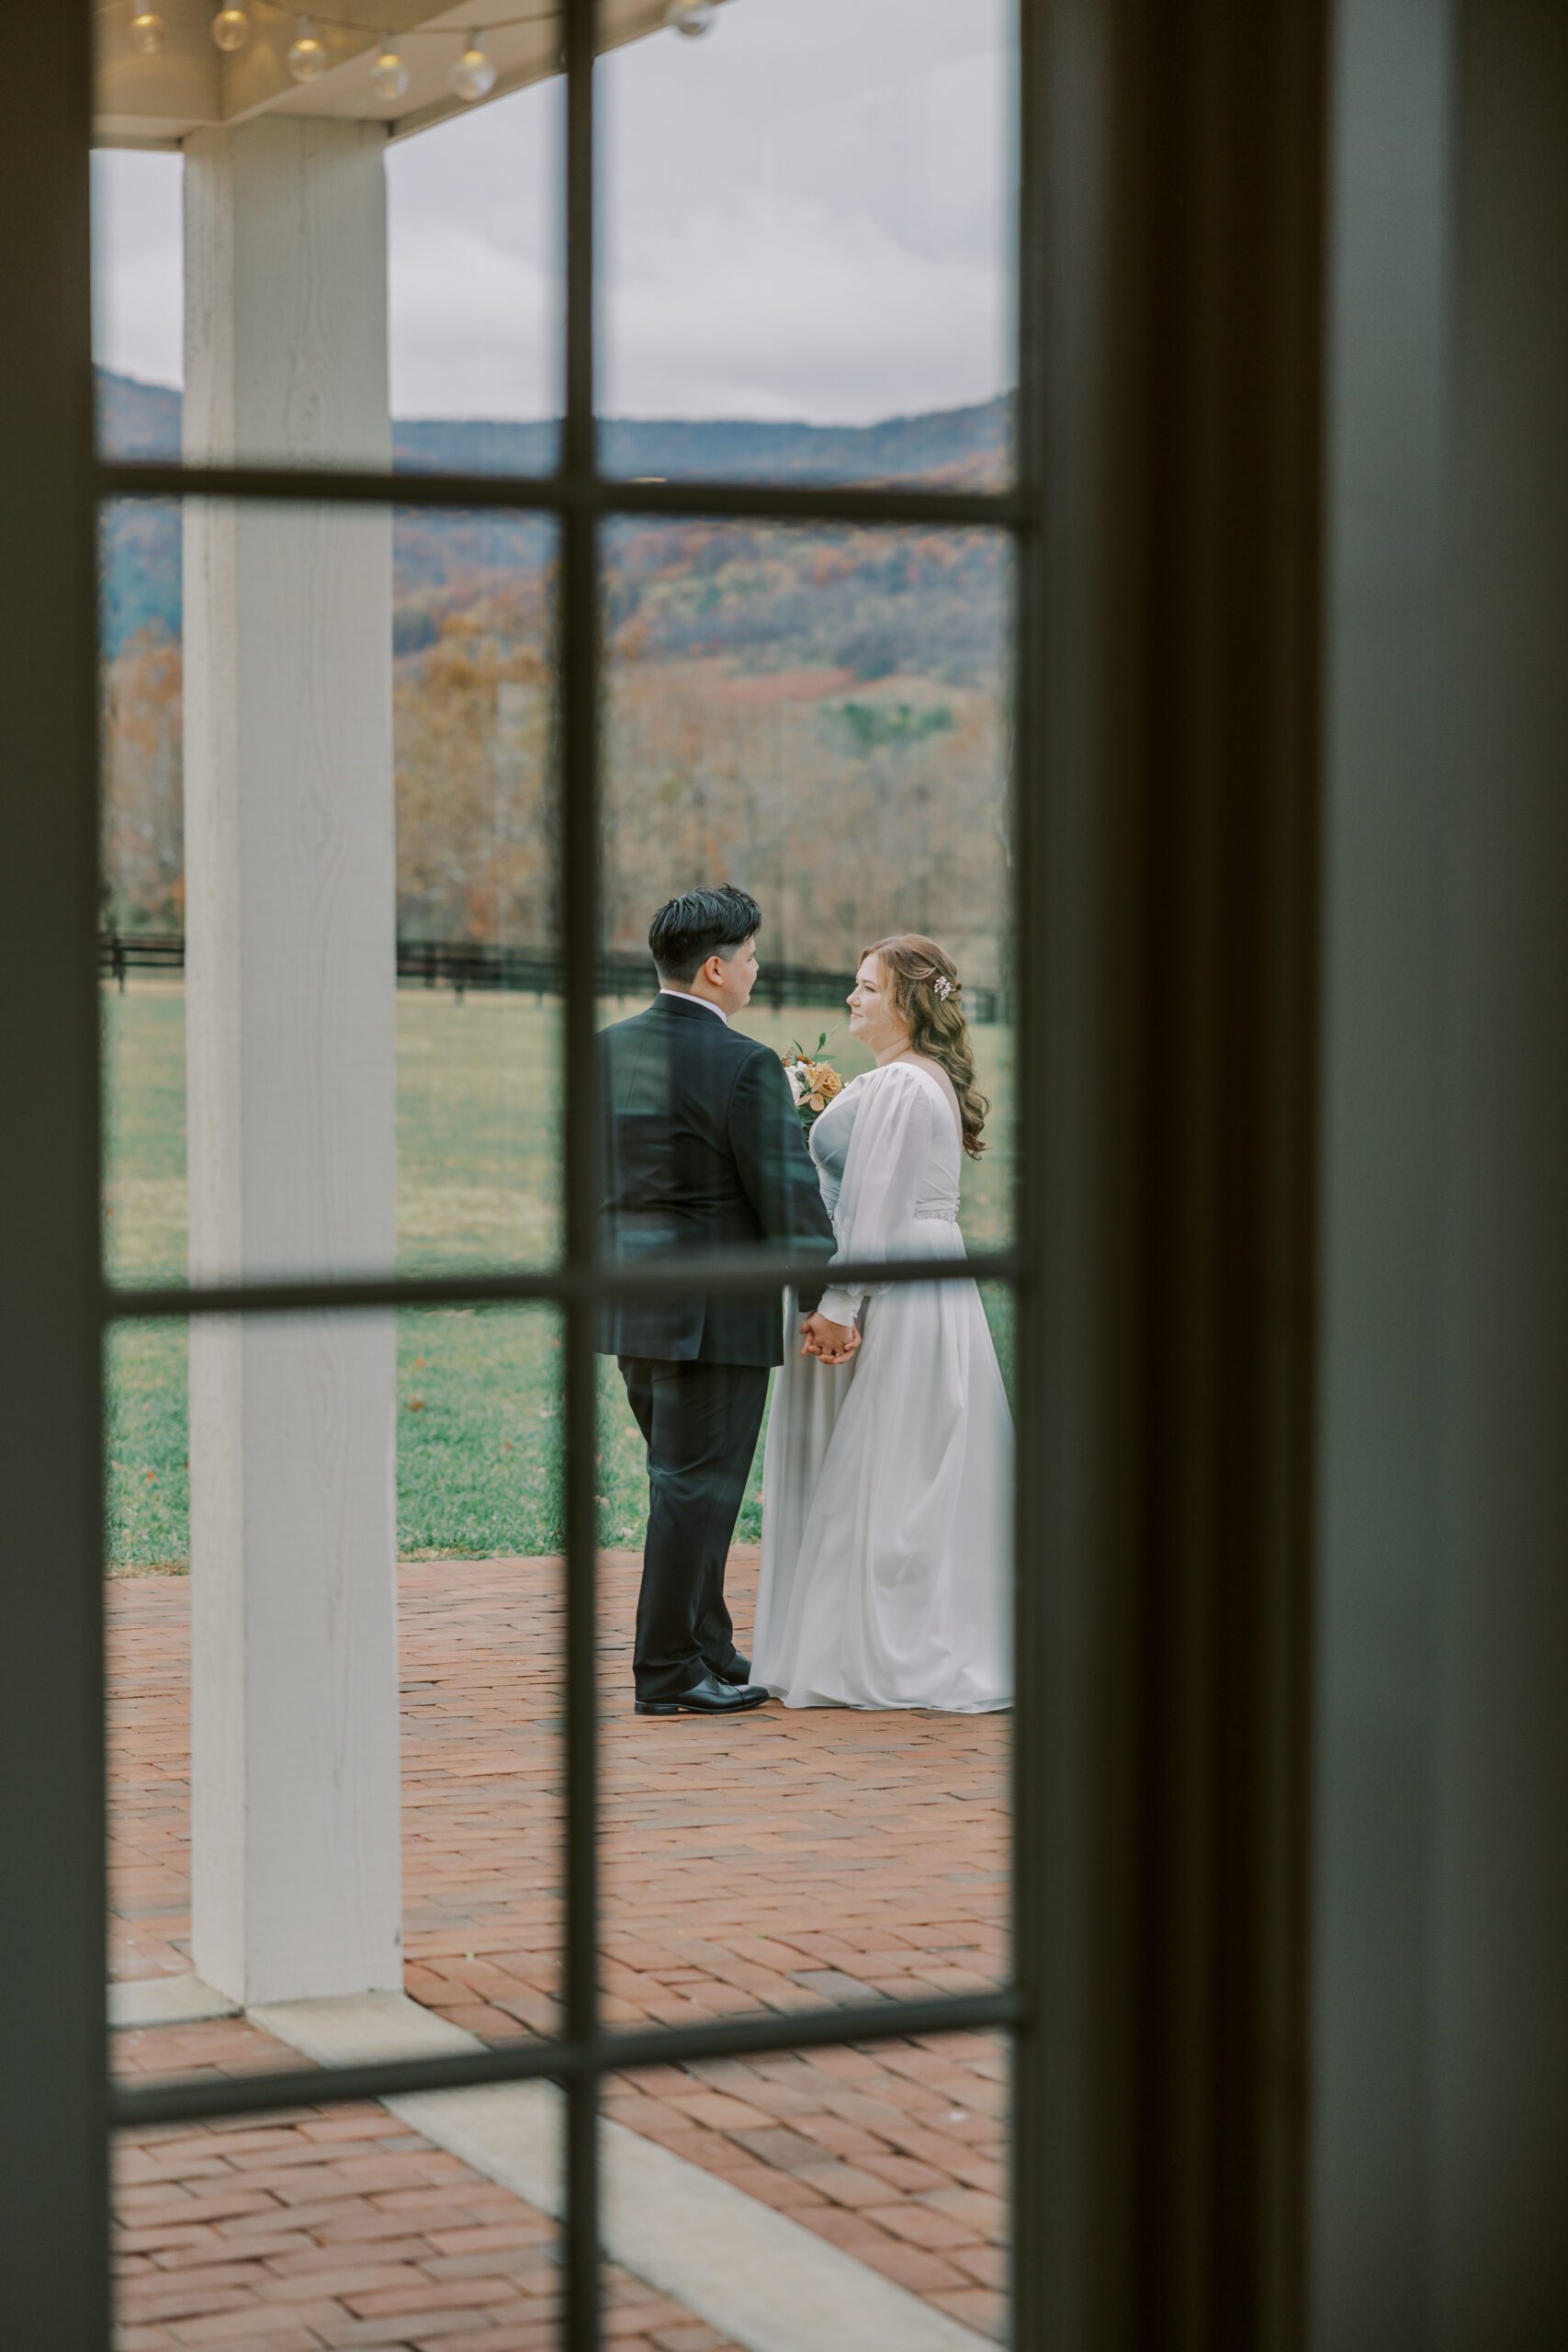 Distance photo taken of bride and groom through a window as they stand outside sharing an quite moment before their wedding ceremony